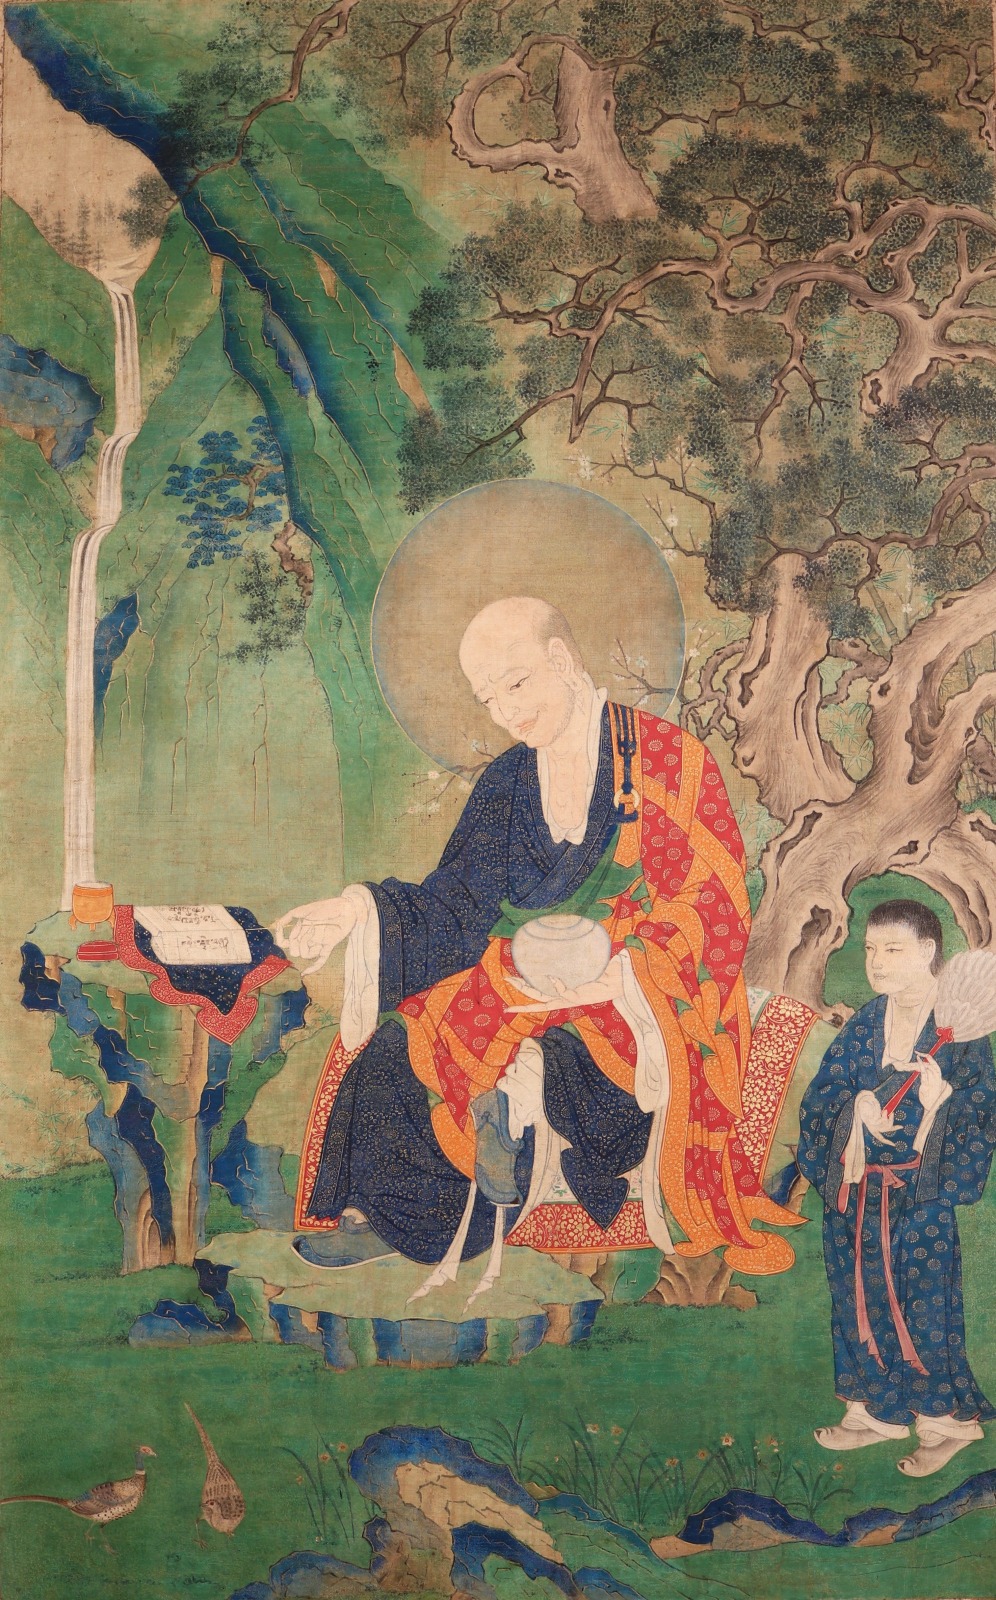 This is a painting of the Arhat Pindola, one of four Arhats asked by the Buddha to remain in the world to propagate Buddhist law.